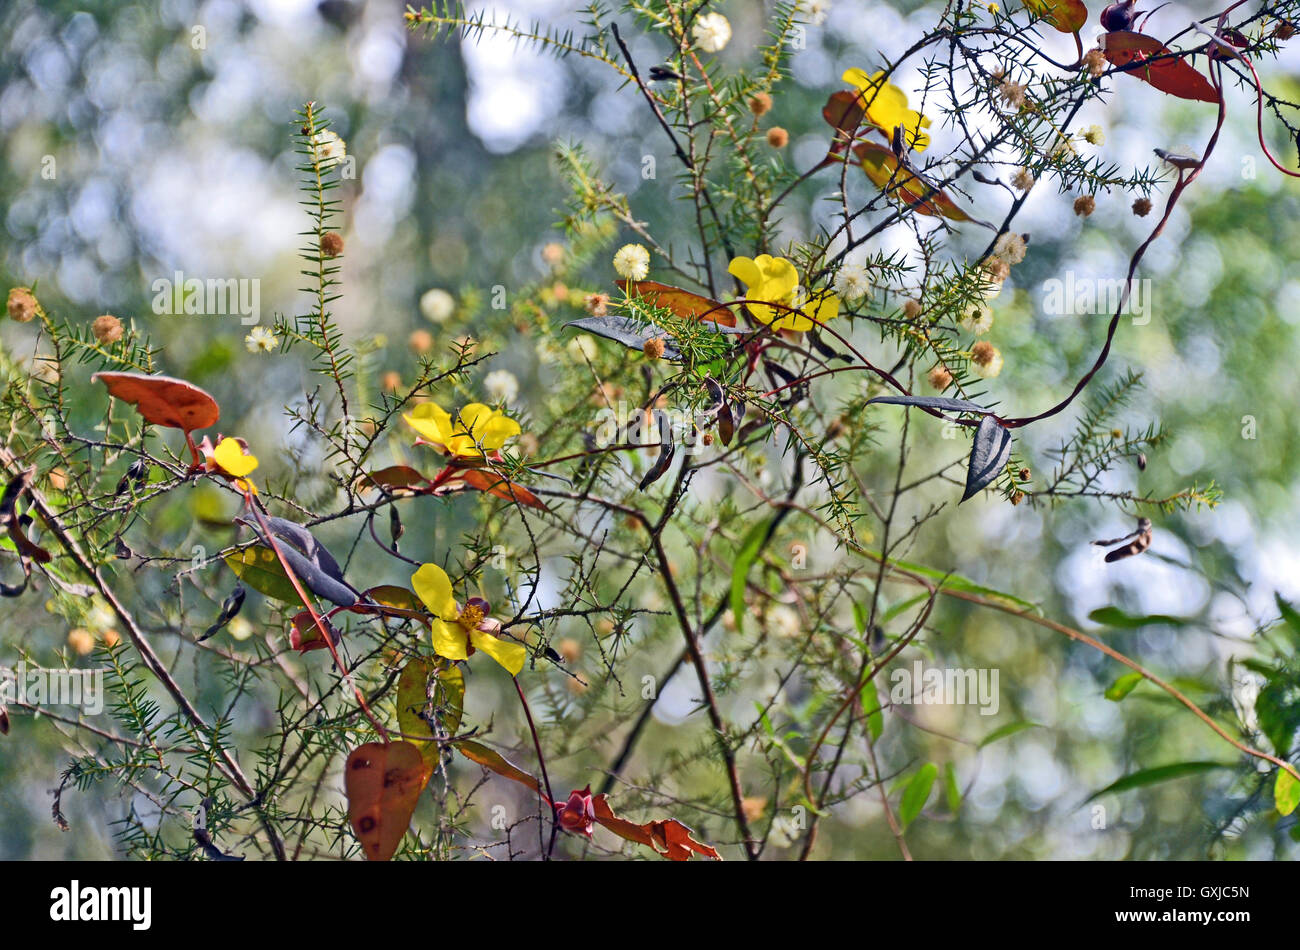 Climbing Guinea Flower (Hibbertia scandens) entwined around Wattle (Acacia) flowers and seed pods in the Australian Bush Stock Photo